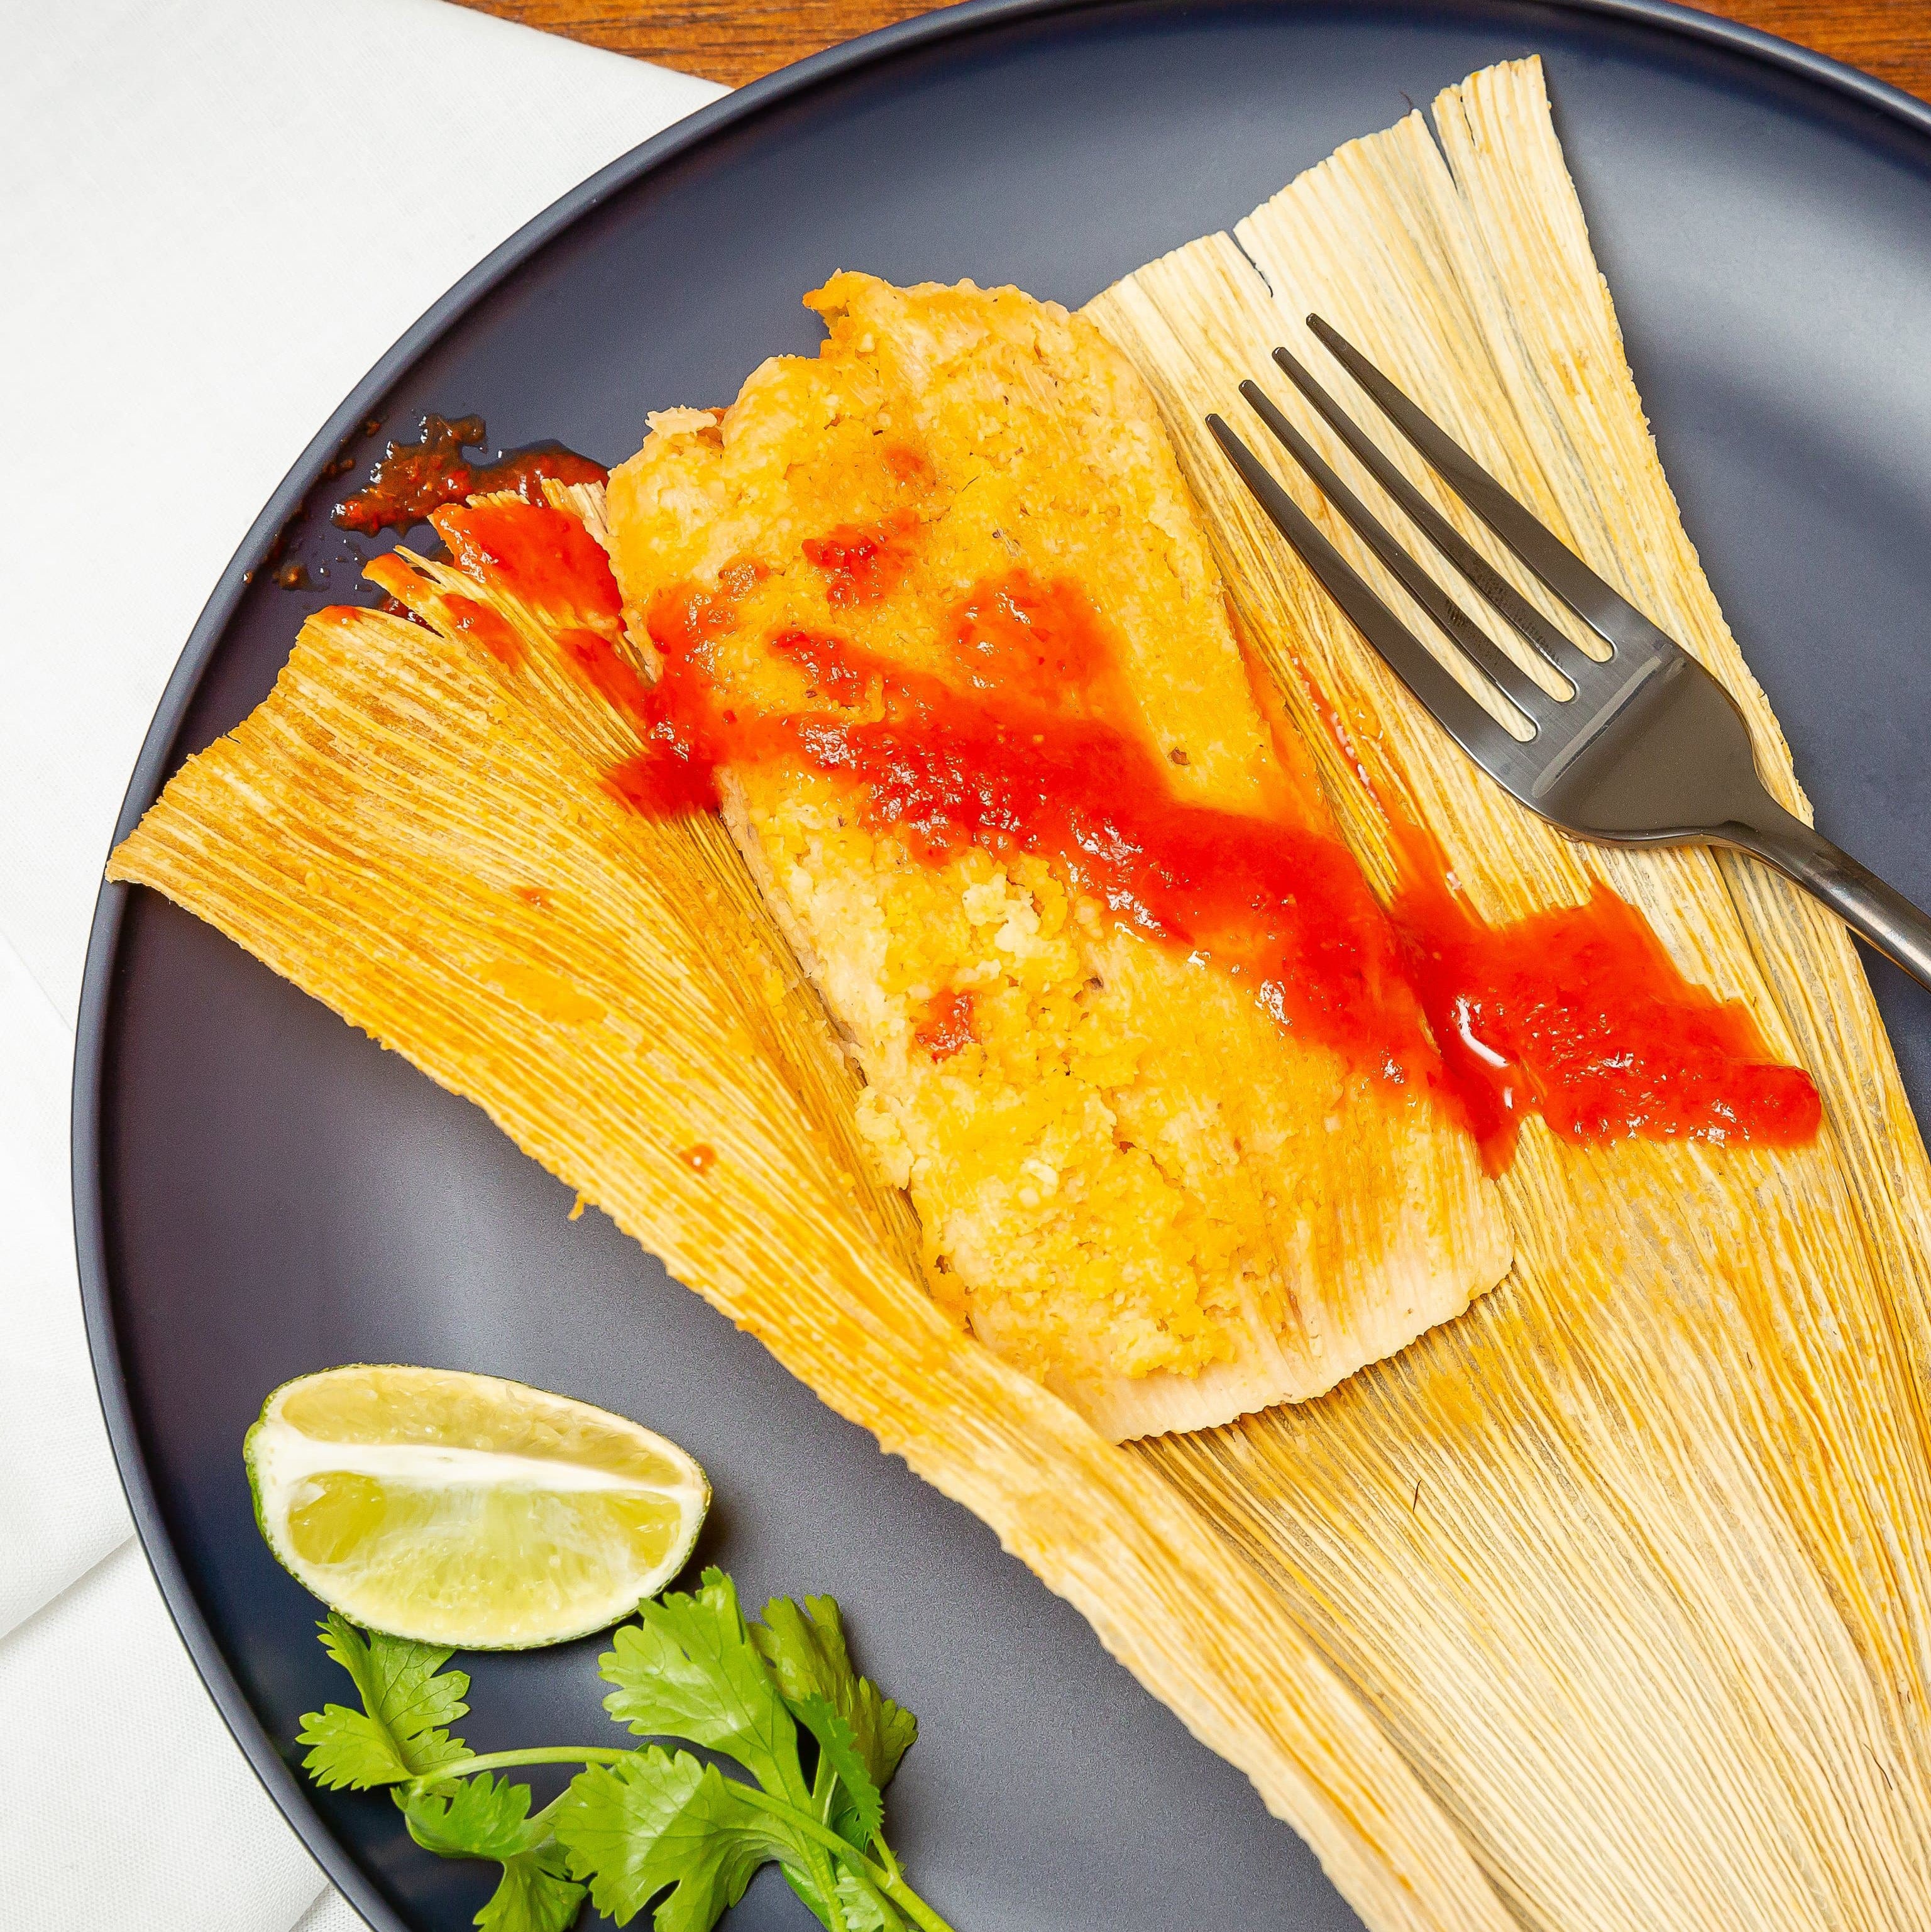 A freshly cooked Hatch Green Chile Chicken Tamale with bright red sauce on top, placed on a dark blue plate accompanied by a slice of lime and a sprig of cilantro, with a fork resting.